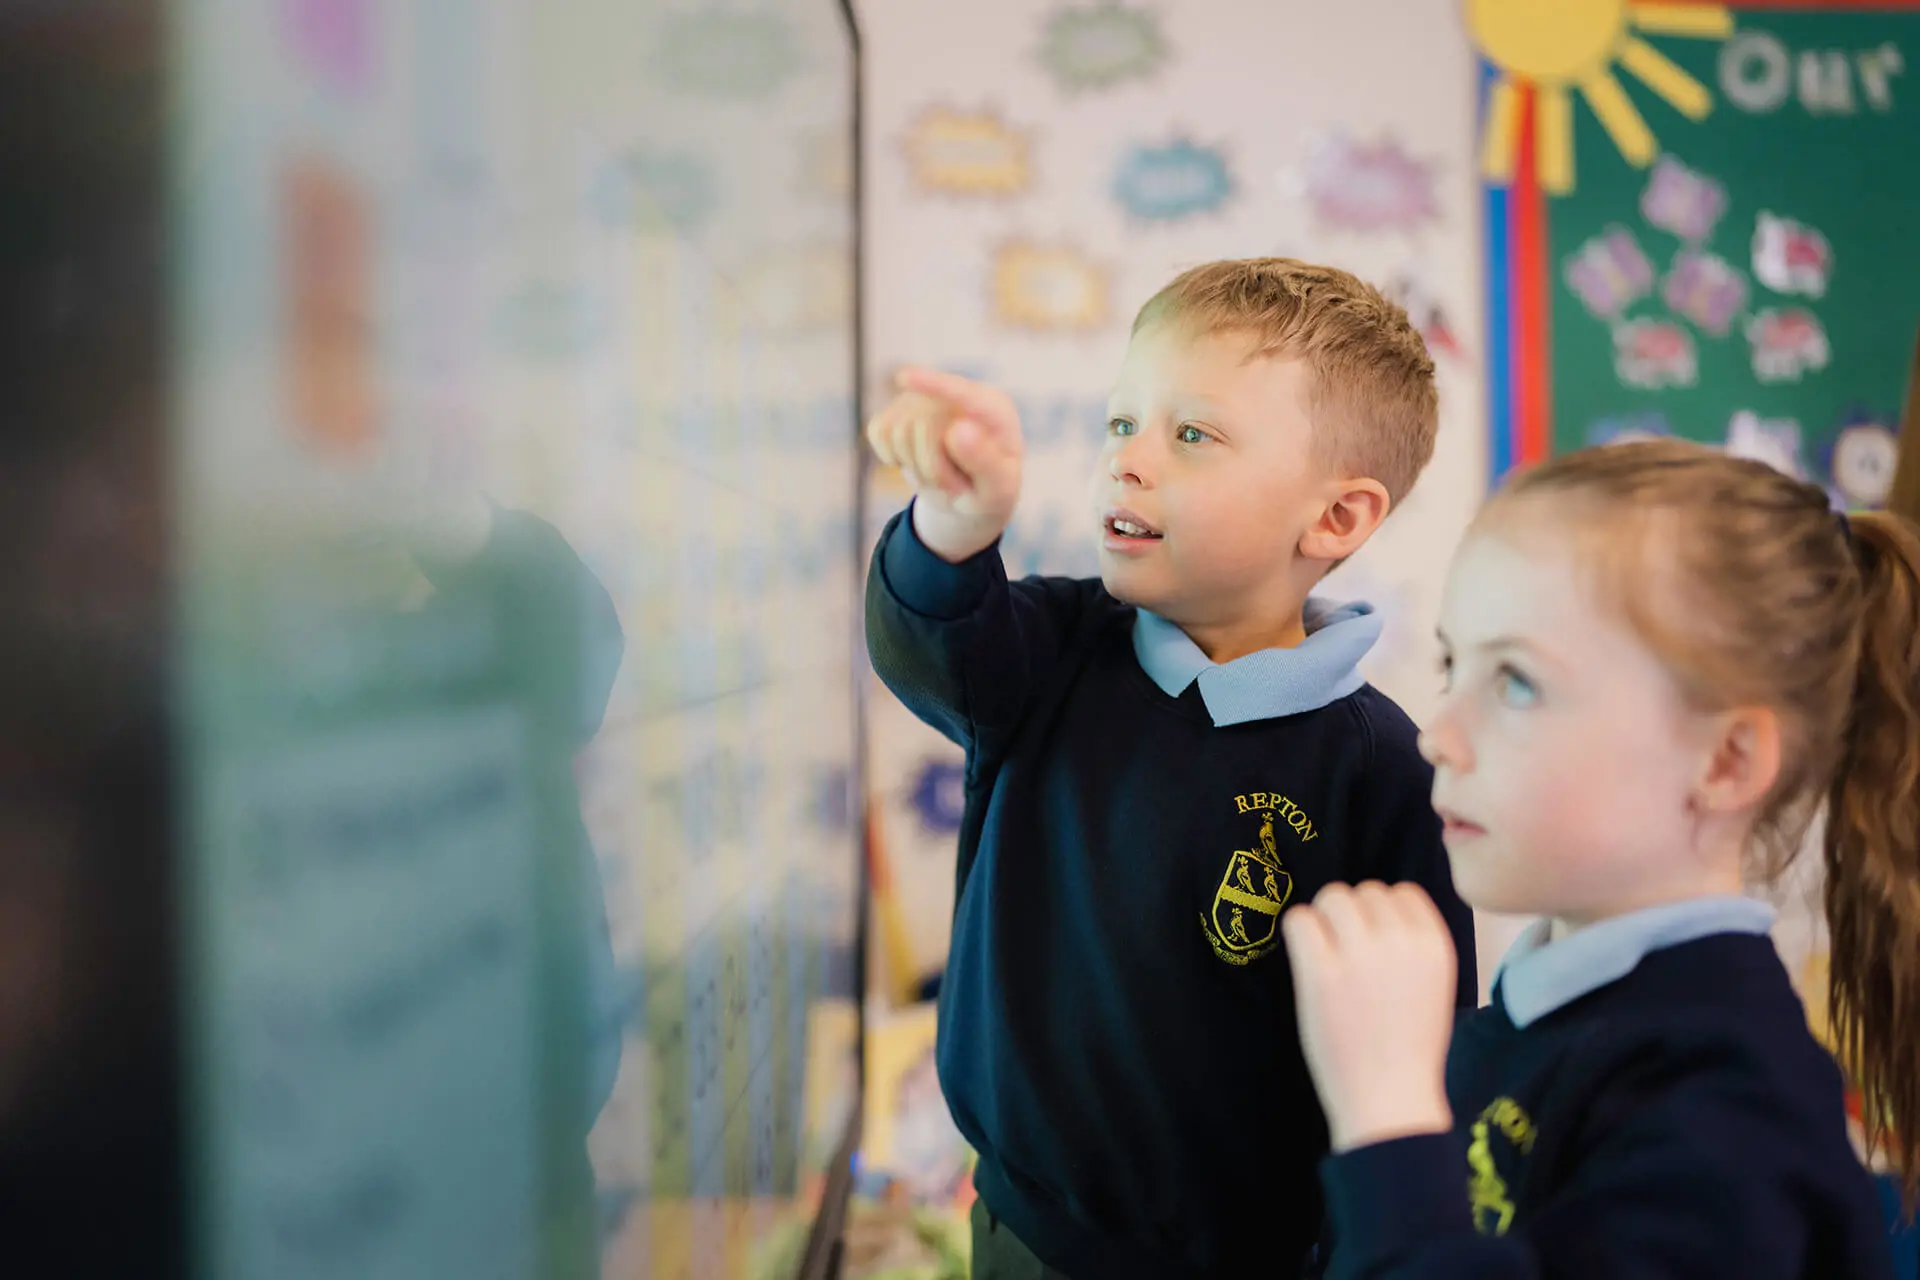 Repton Pre-Prep pupils learning in class